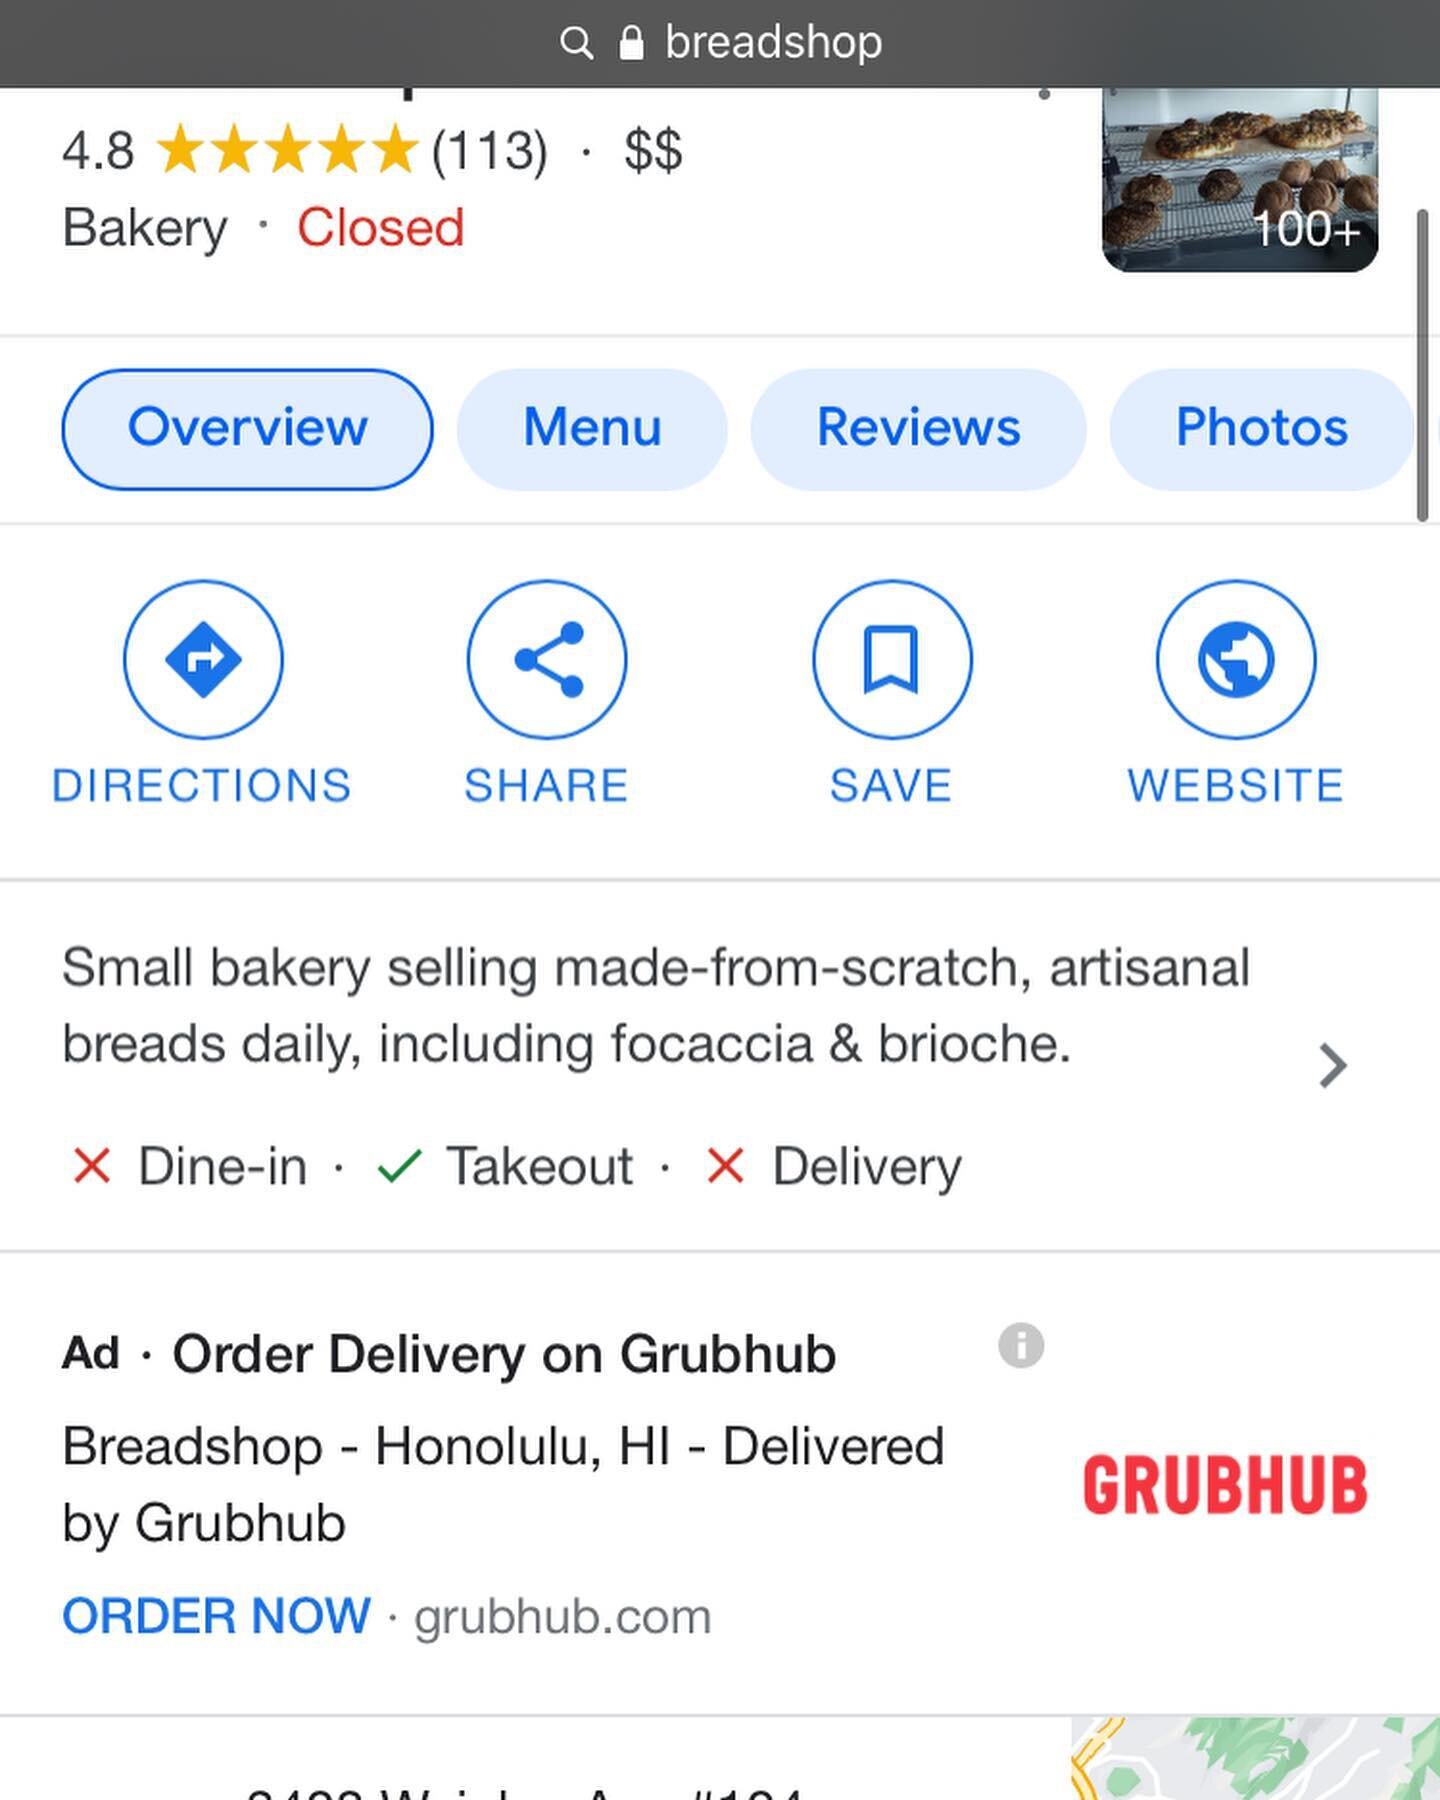 Dear @grubhub @google, 

Please remove this ad.

We do not use @grubhub for delivery or any other service. Furthermore the page and menu the ad takes you to does not represent @breadshophnl or is affiliated with us in any way.